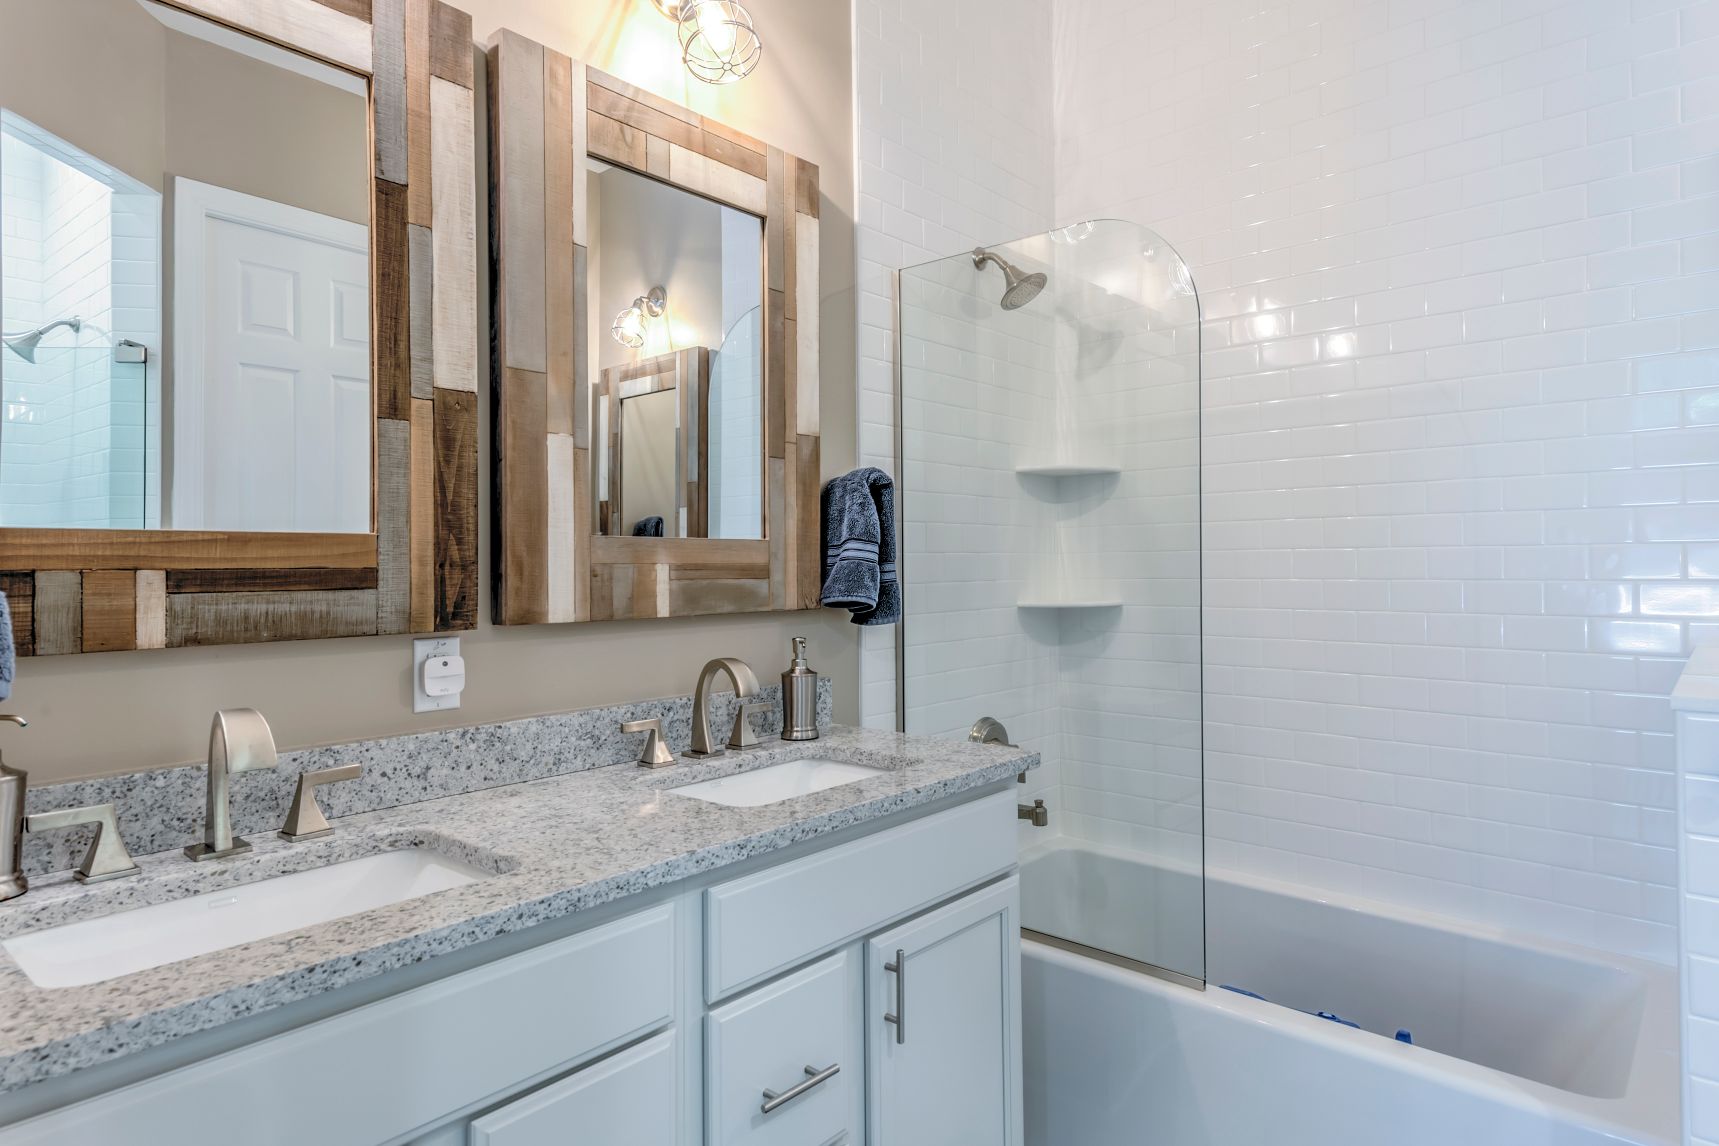 Bathroom in Juniper Court, Ocean Pines MD with Dual Sink and Two Square Mirrors with Mosaic Frames